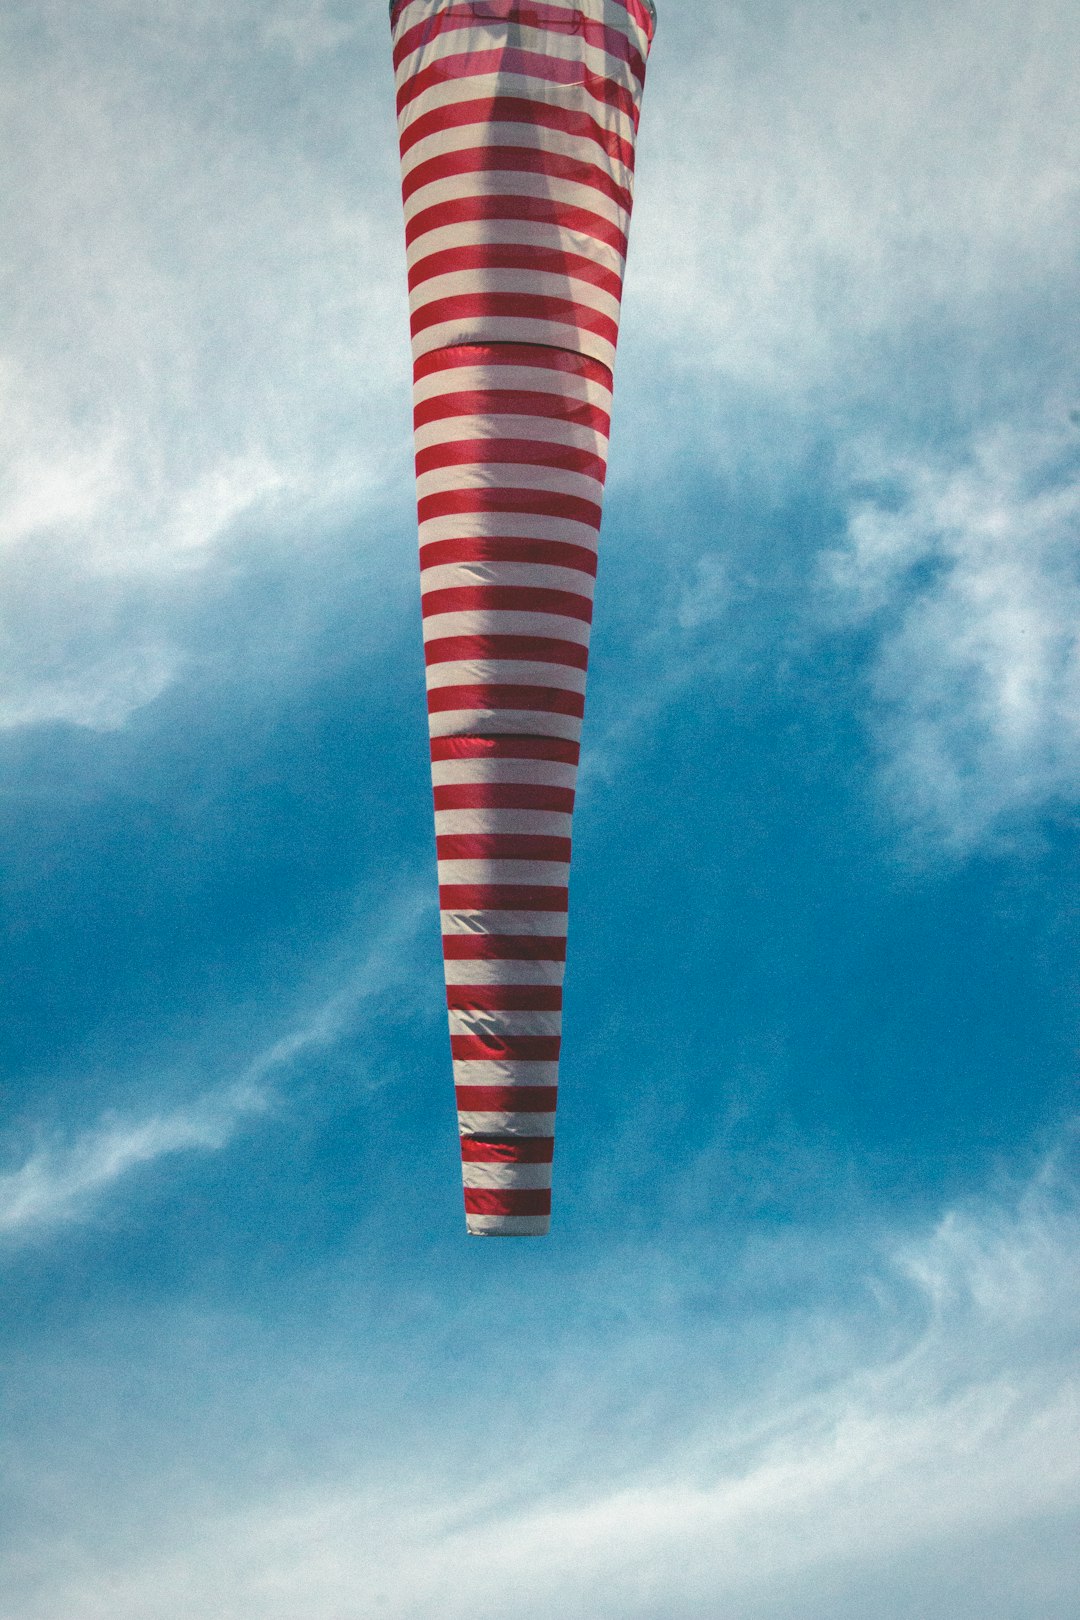 red and white striped hot air balloo under blue and white sky